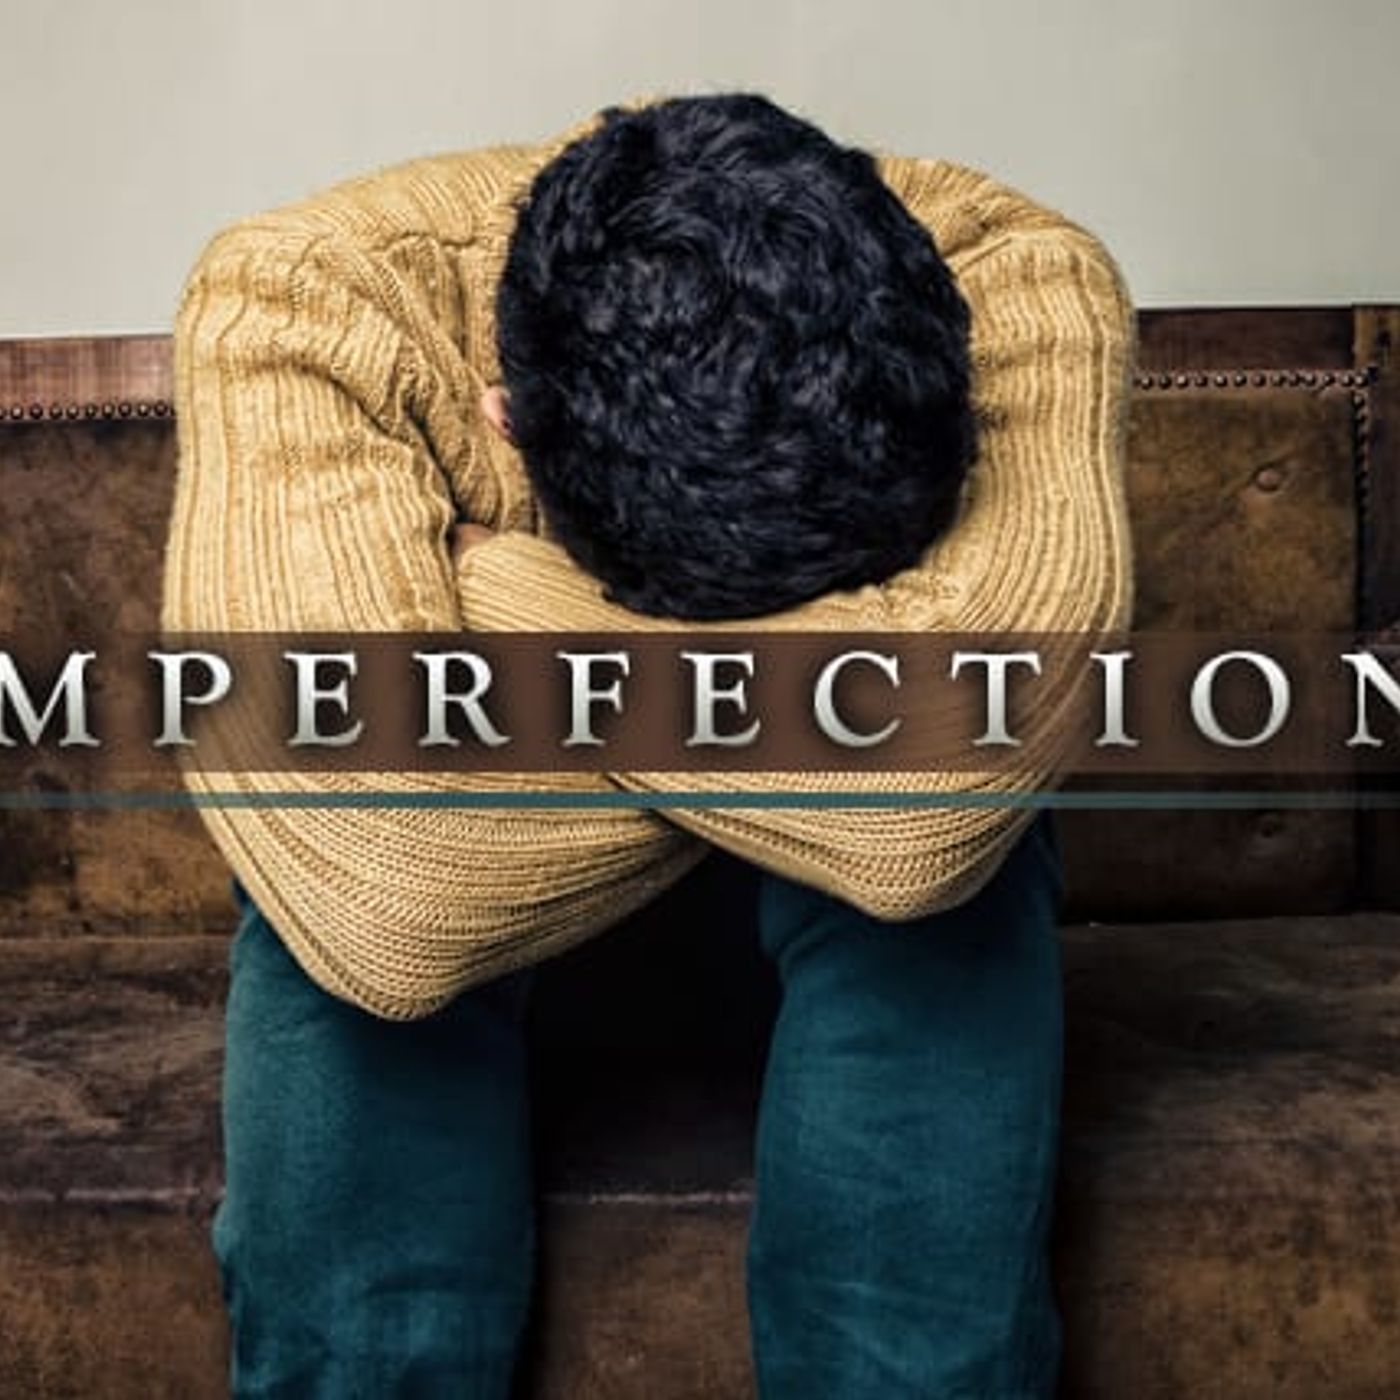 How should we view our Imperfections?